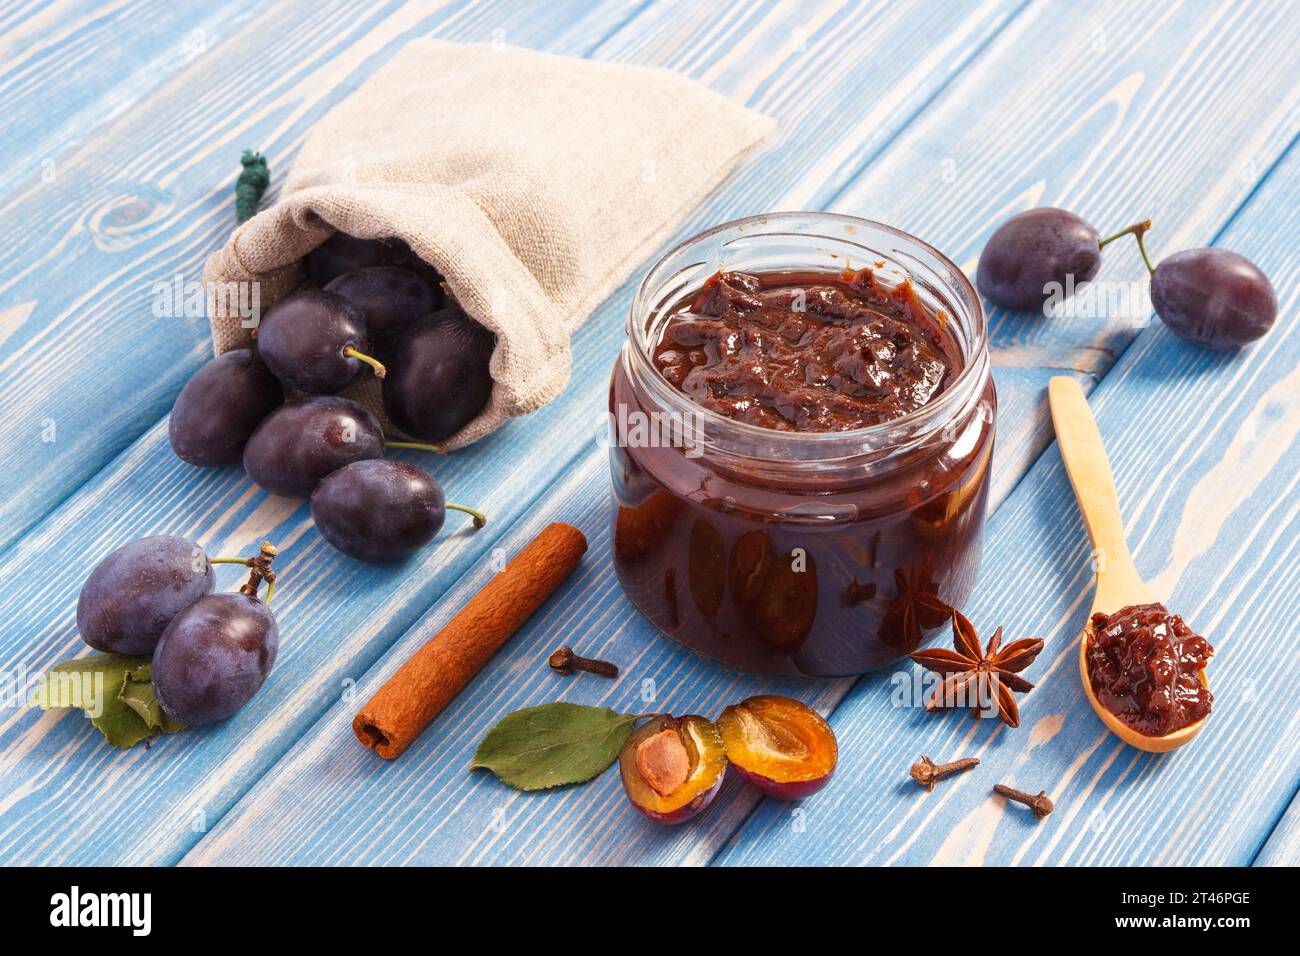 Fresh plum jam or marmalade in glass jar, ripe fruits and spices on boards, concept of healthy sweet dessert Stock Photo